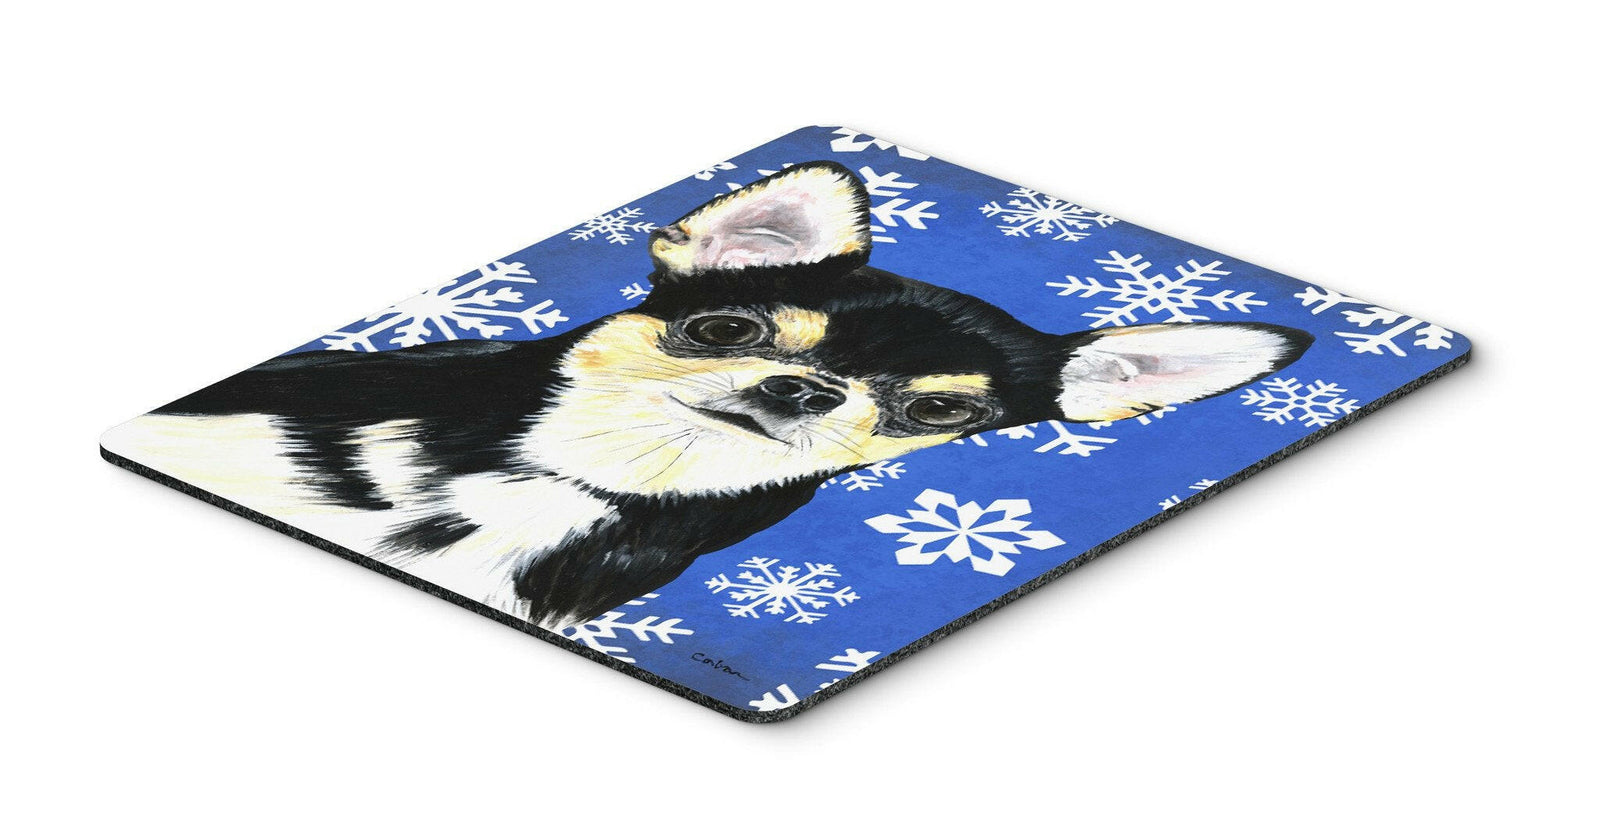 Chihuahua Winter Snowflakes Holiday Mouse Pad, Hot Pad or Trivet by Caroline's Treasures